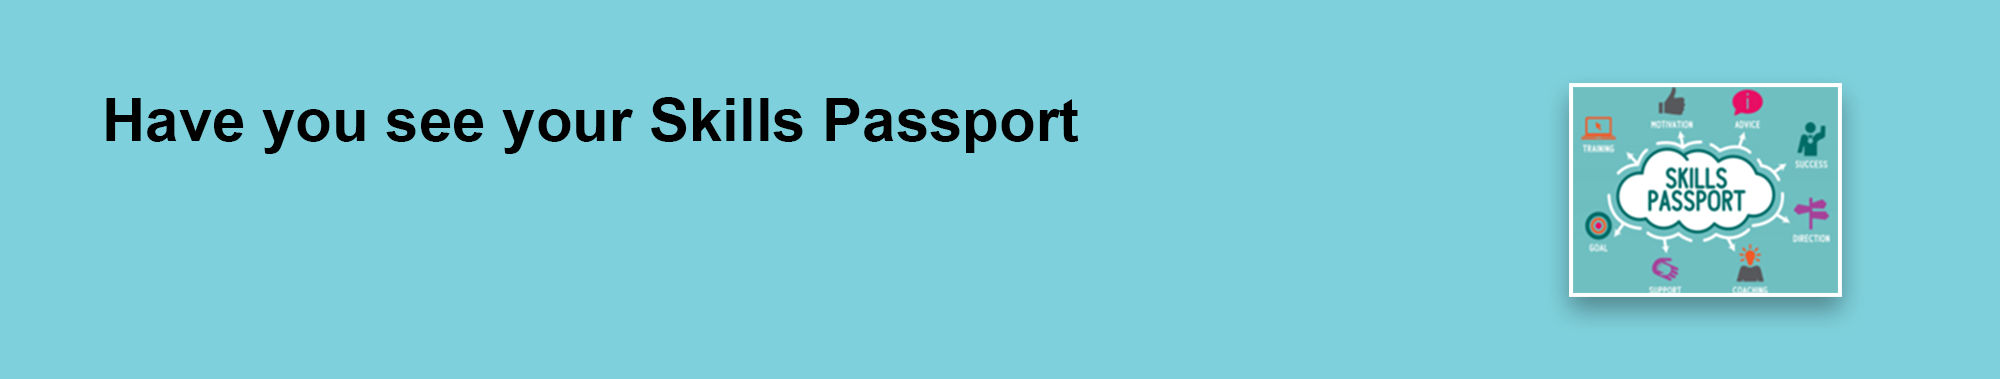 ave you seen your Skills Passport?